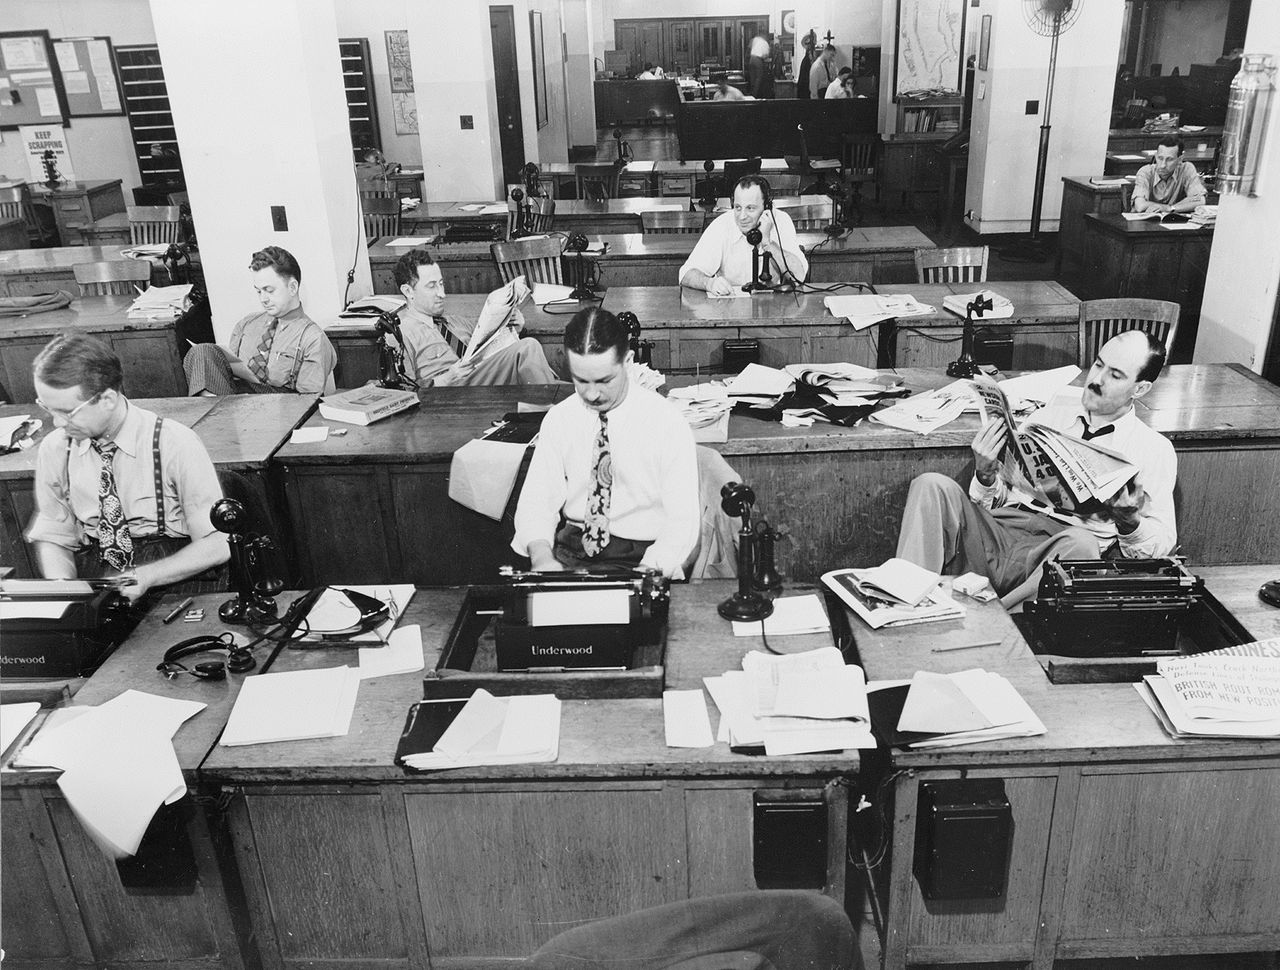 Newsroom of the New York Times newspaper in 1942